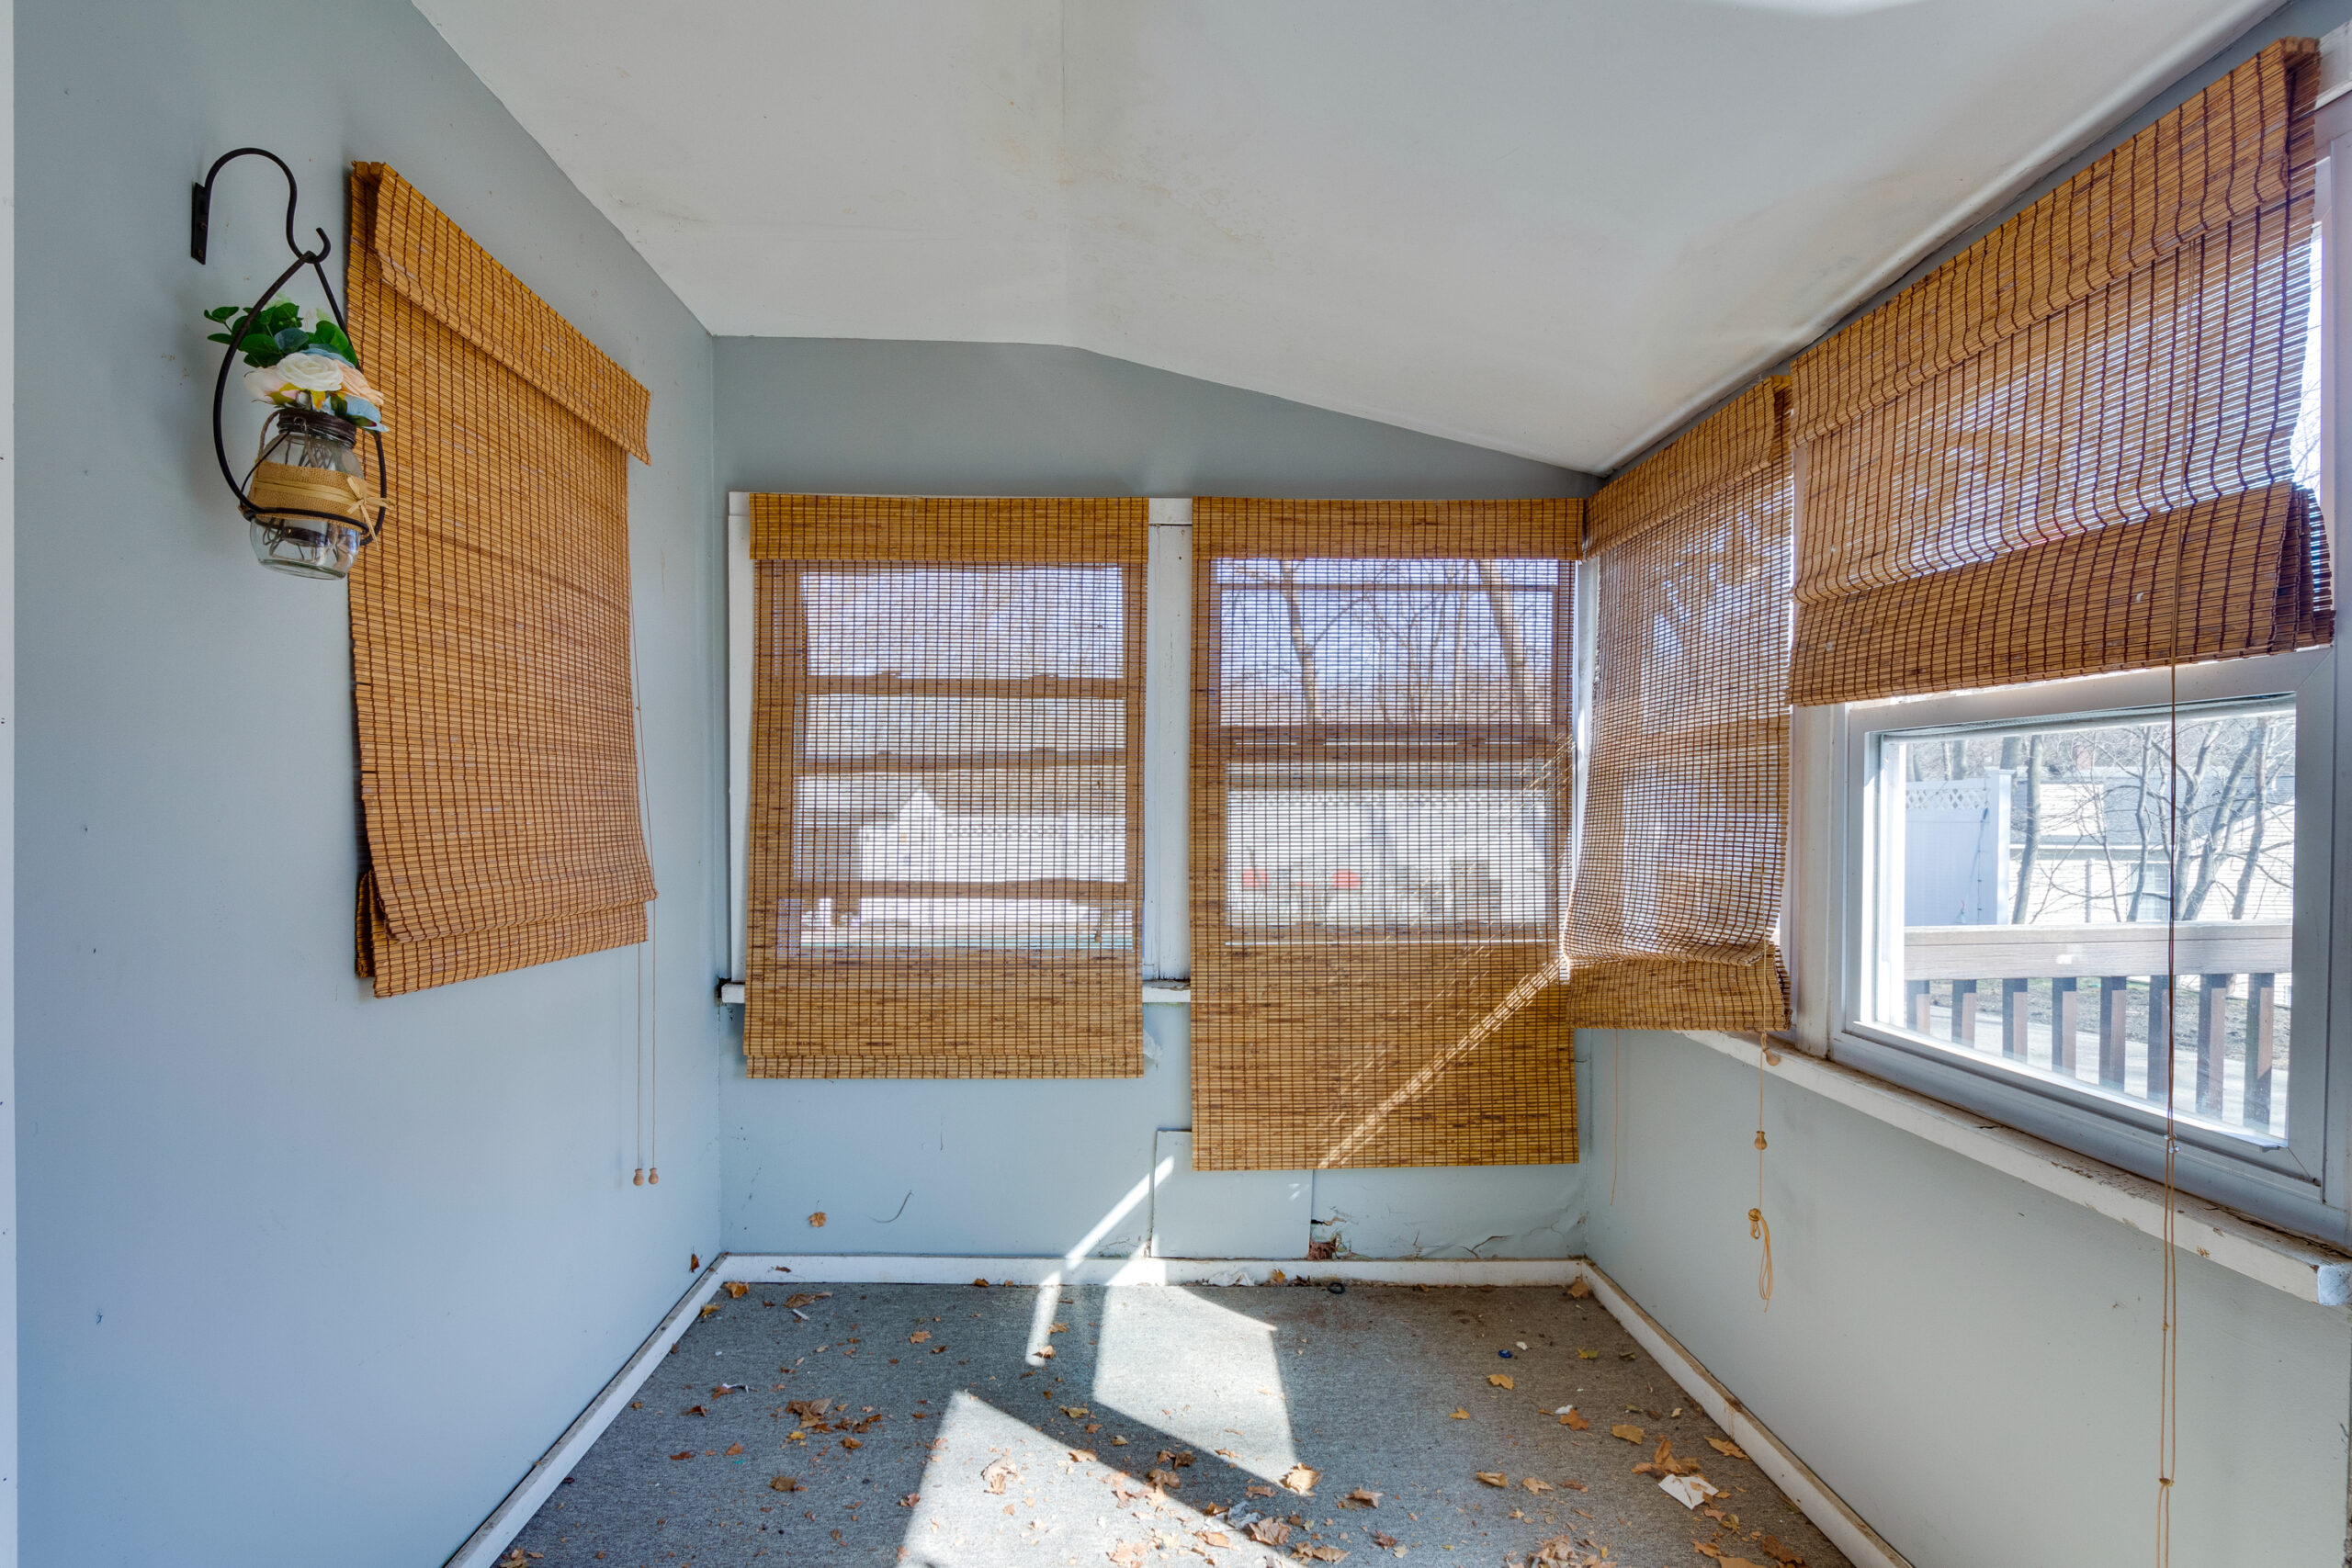 Image of a sunroom before renovation in a vintage New England home. The room has worn-out bamboo blinds partially covering large windows, a light blue wall, and a slightly stained carpet. A decorative lantern hangs on the wall, and the room appears to be in need of a thorough makeover.